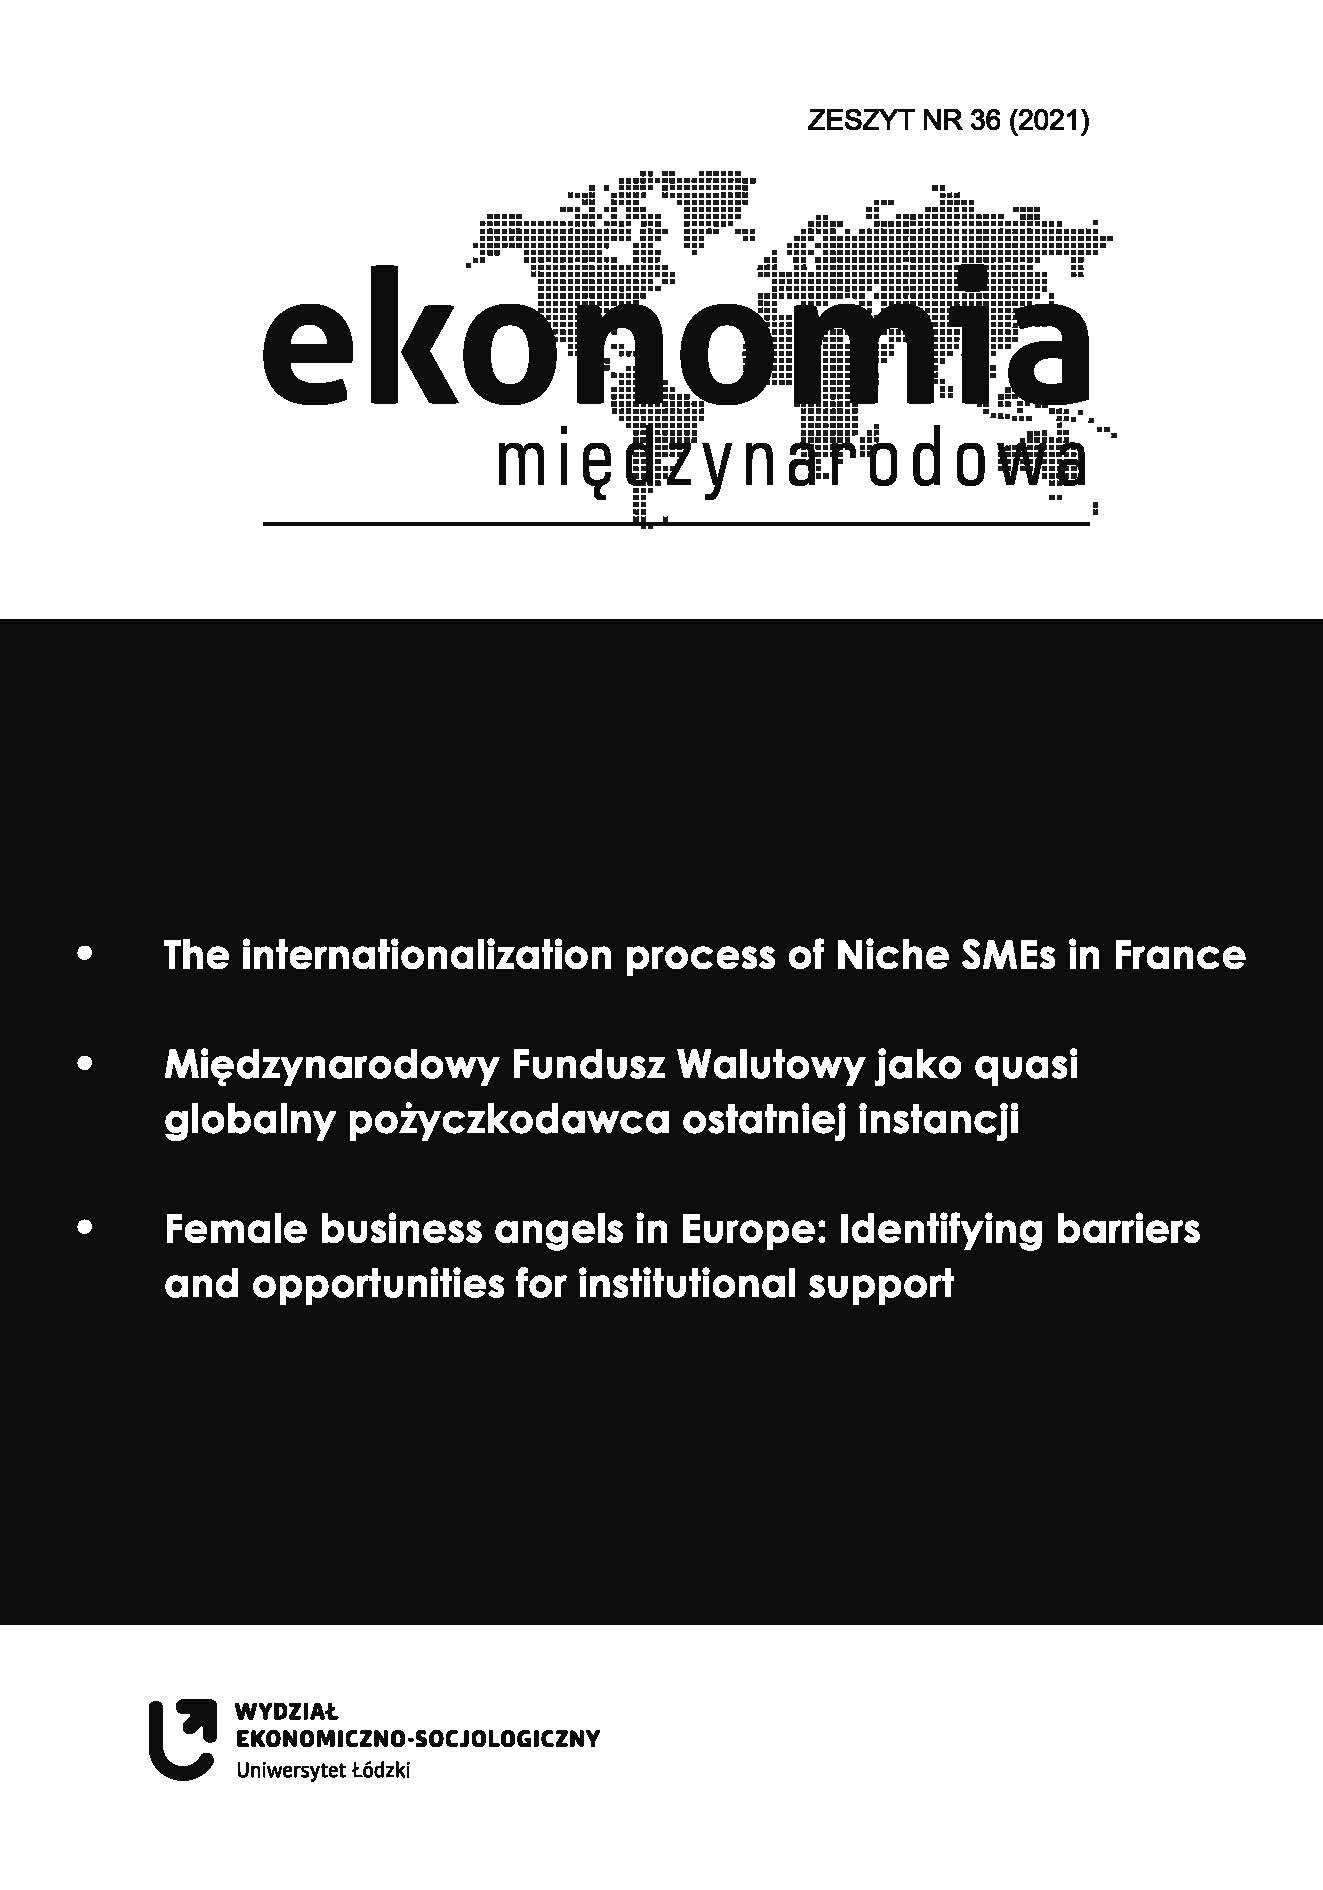 The internationalization process of Niche SMEs in France Cover Image